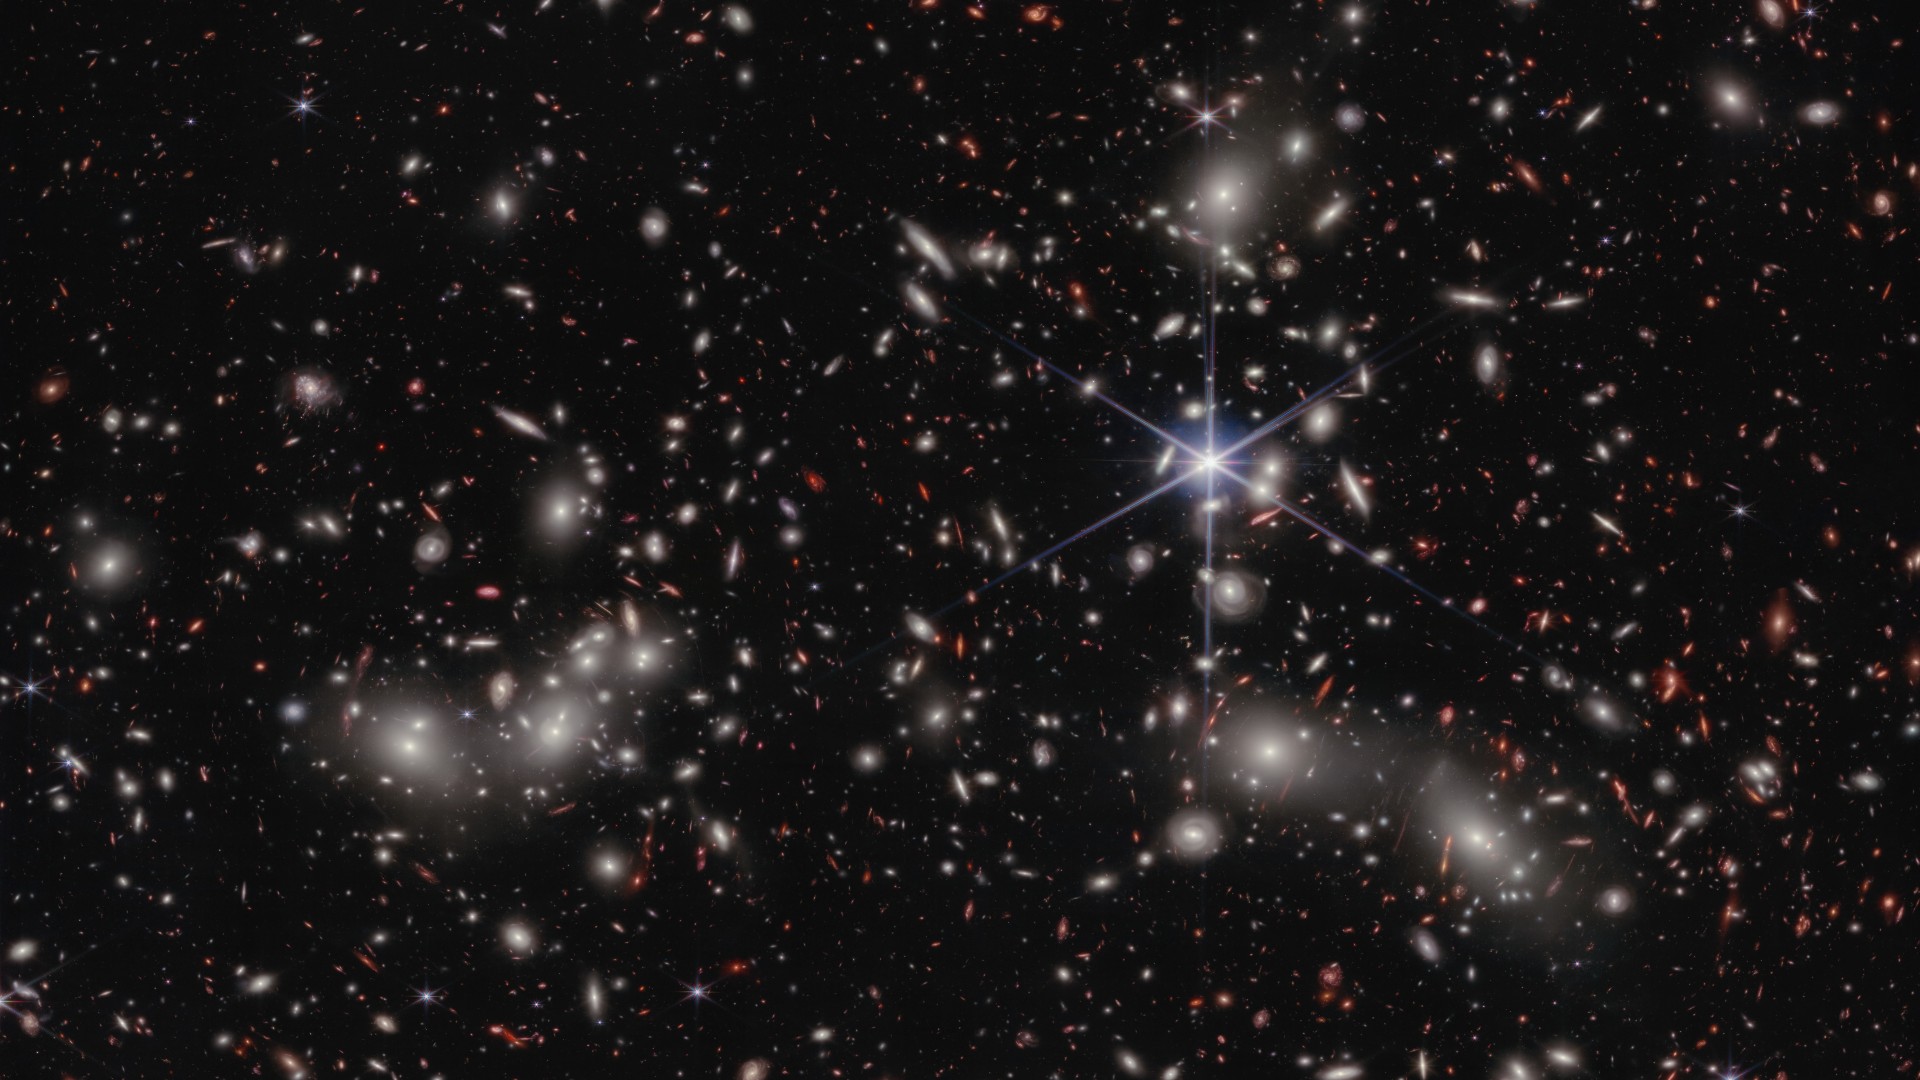 James Webb Space Telescope finds 2 of the most distant galaxies ever seen Space